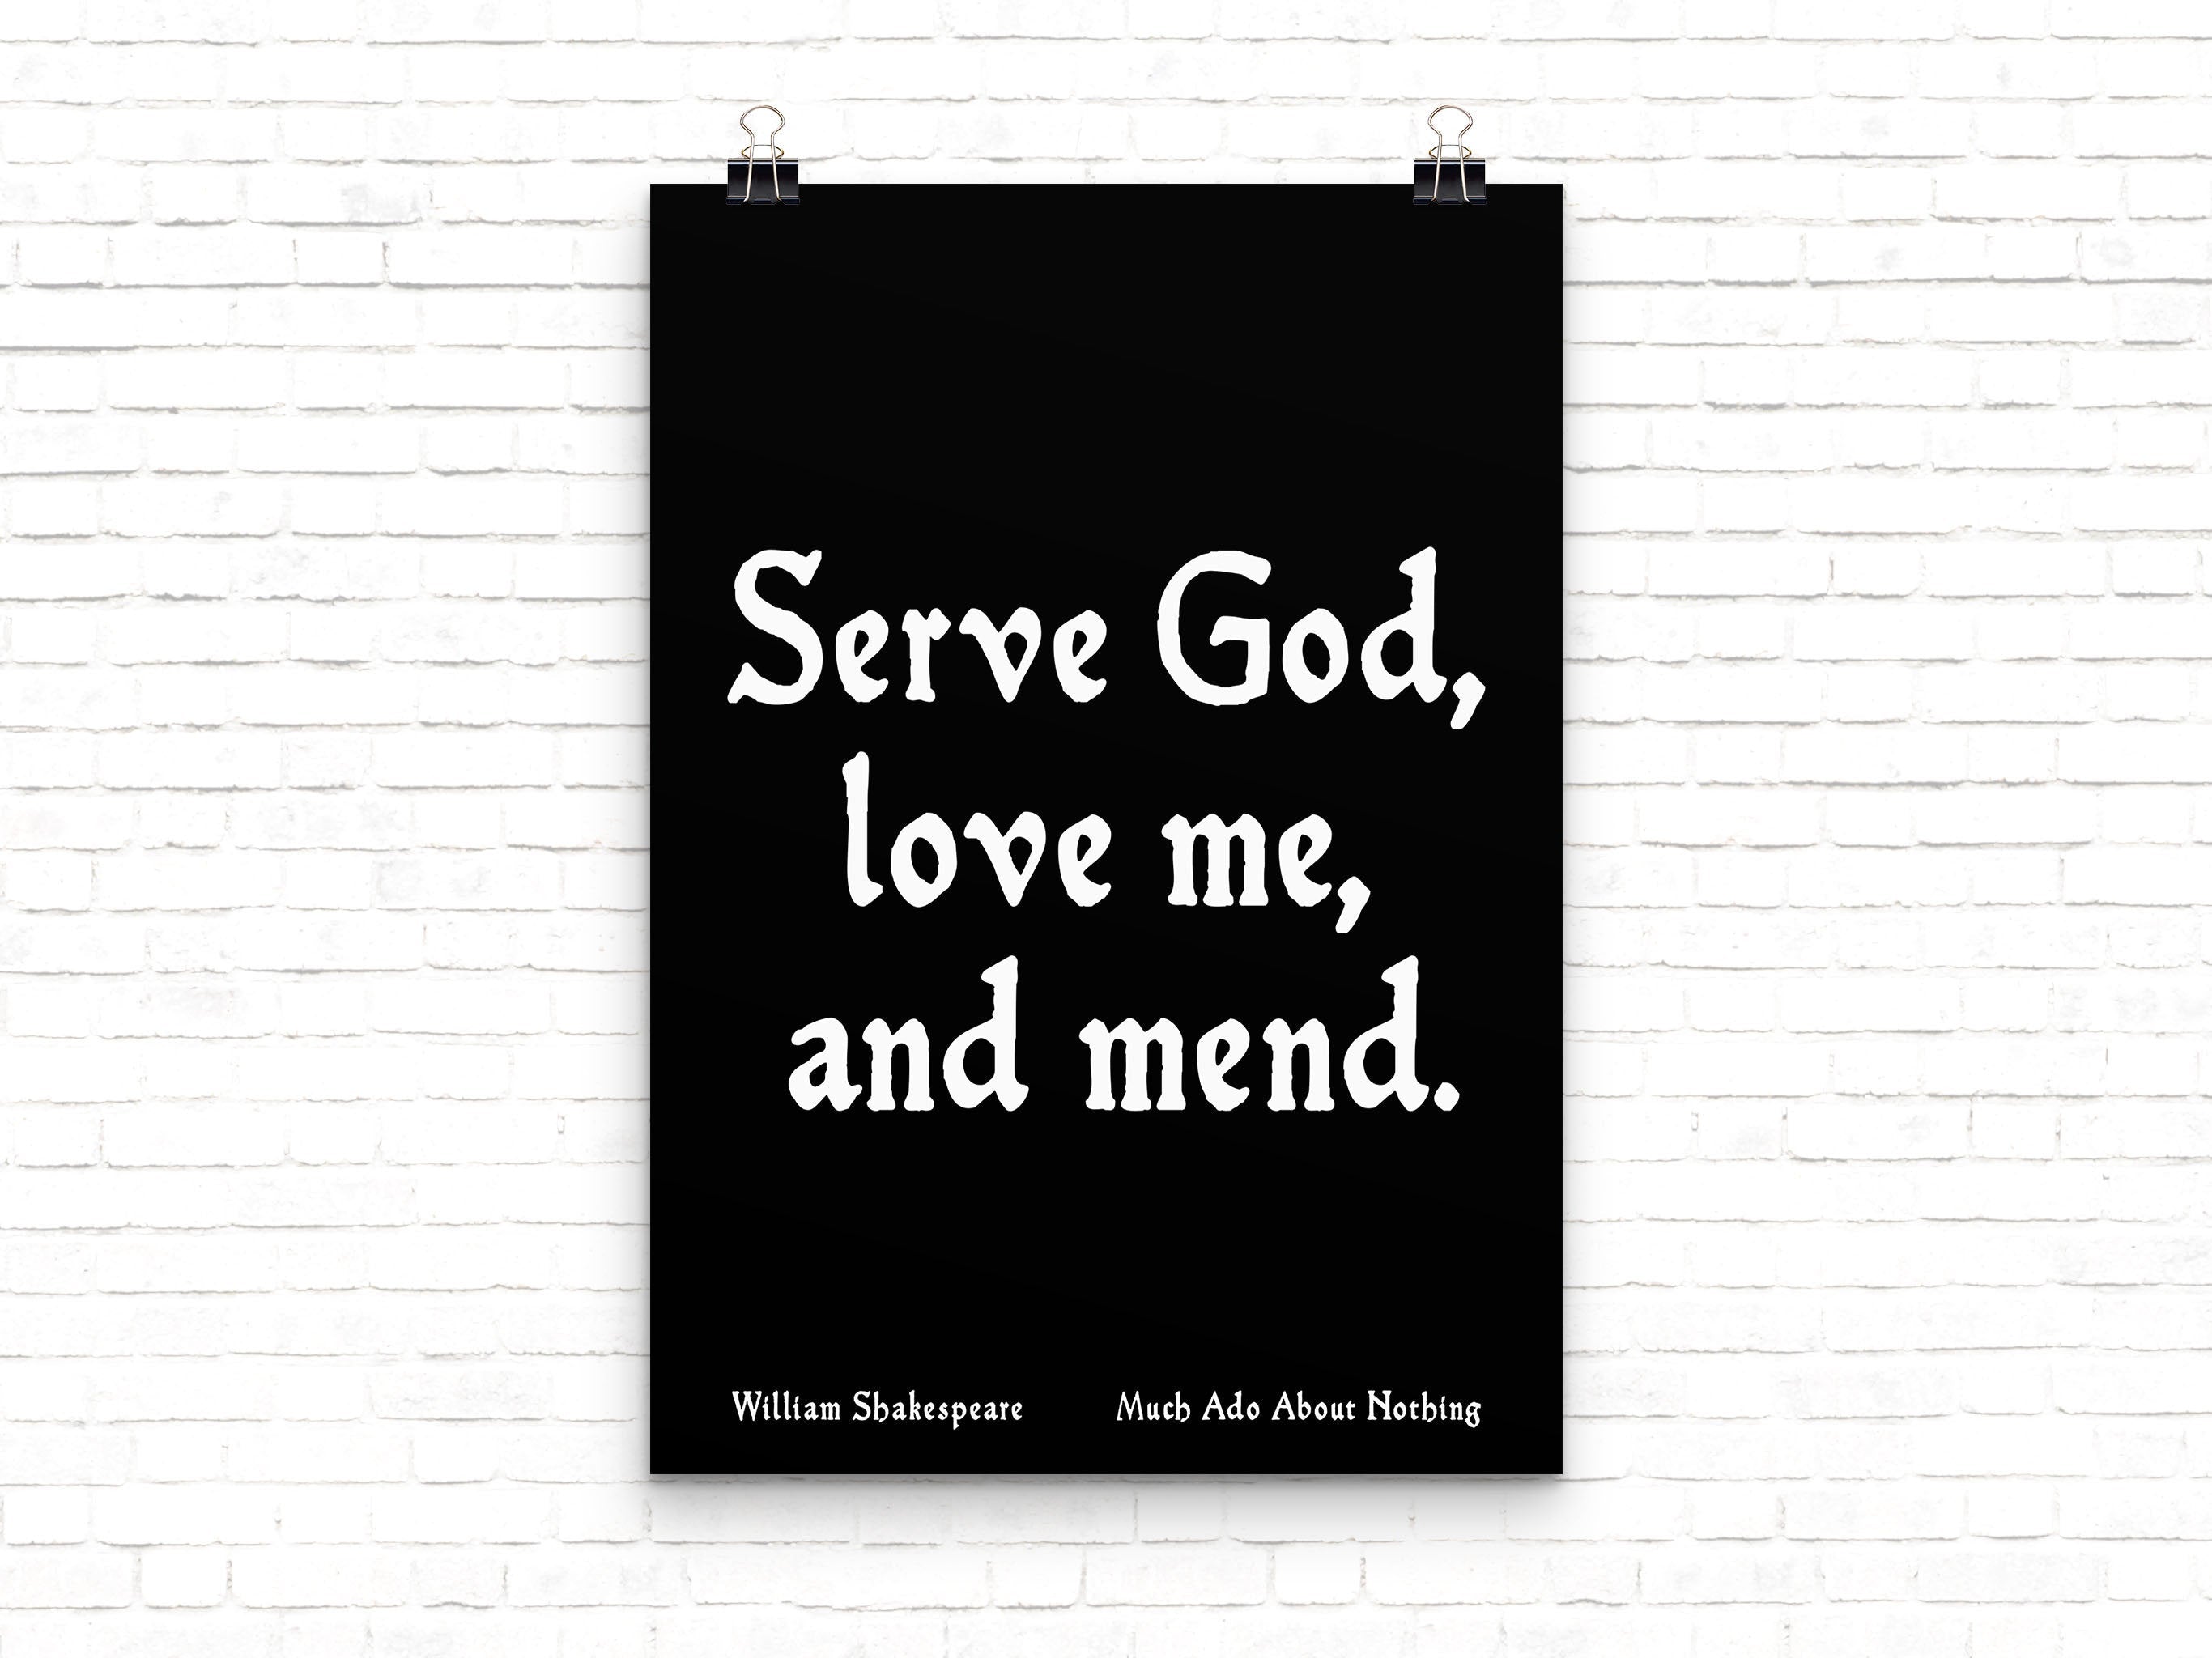 Shakespeare Print wall quote, William Shakespeare, Serve God Love me and mend, Much Ado About Nothing, black & white Unframed - BookQuoteDecor